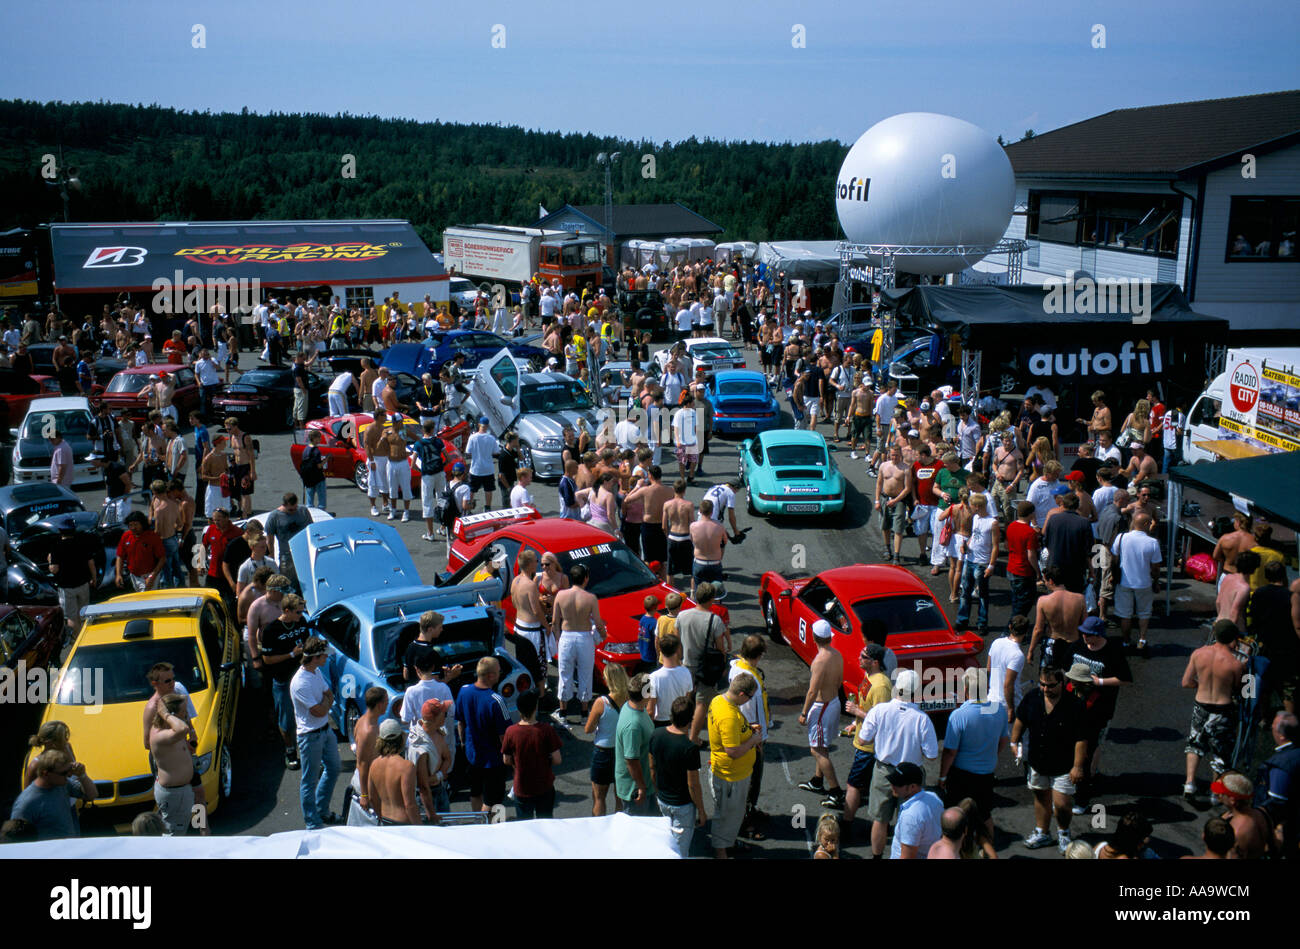 Overview of the paddock at the street racing event Gatebil at Rudskogen in Norway Stock Photo